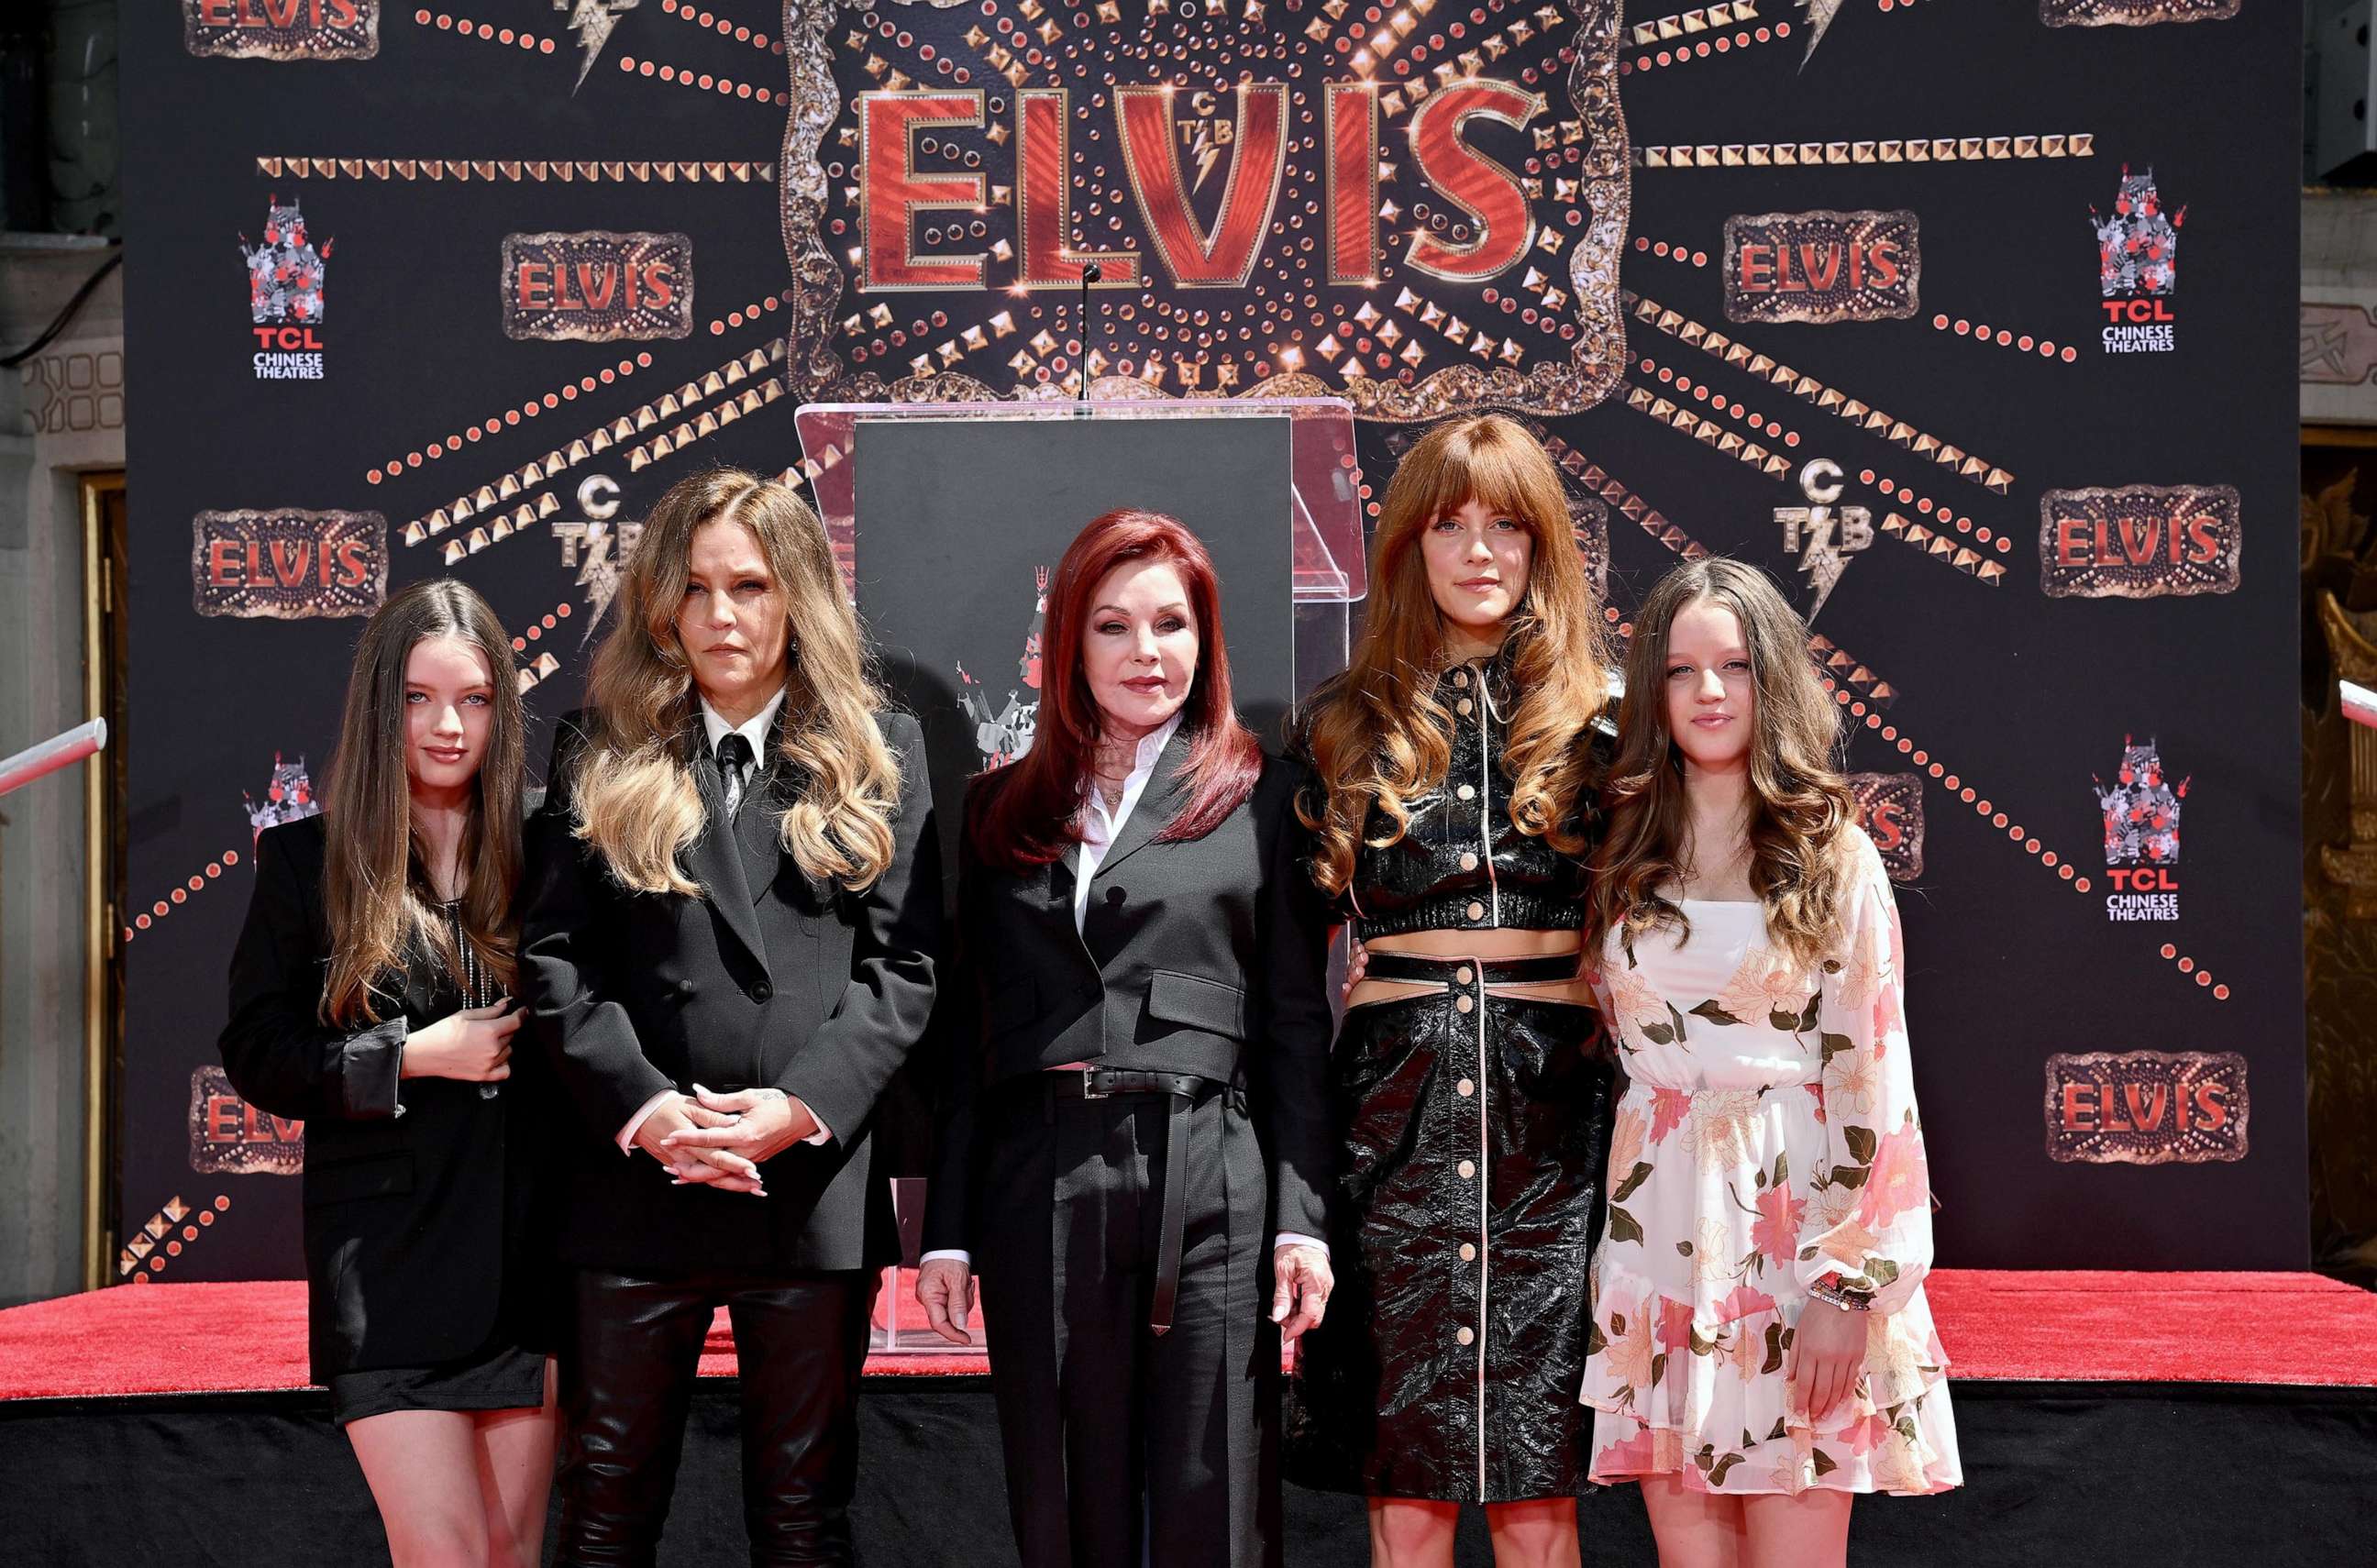 PHOTO: Harper Vivienne Ann Lockwood, Lisa Marie Presley, Priscilla Presley, Riley Keough, and Finley Aaron Love Lockwood attend the Handprint Ceremony honoring Three Generations of Presley's at TCL Chinese Theatre, June 21, 2022 in Hollywood.